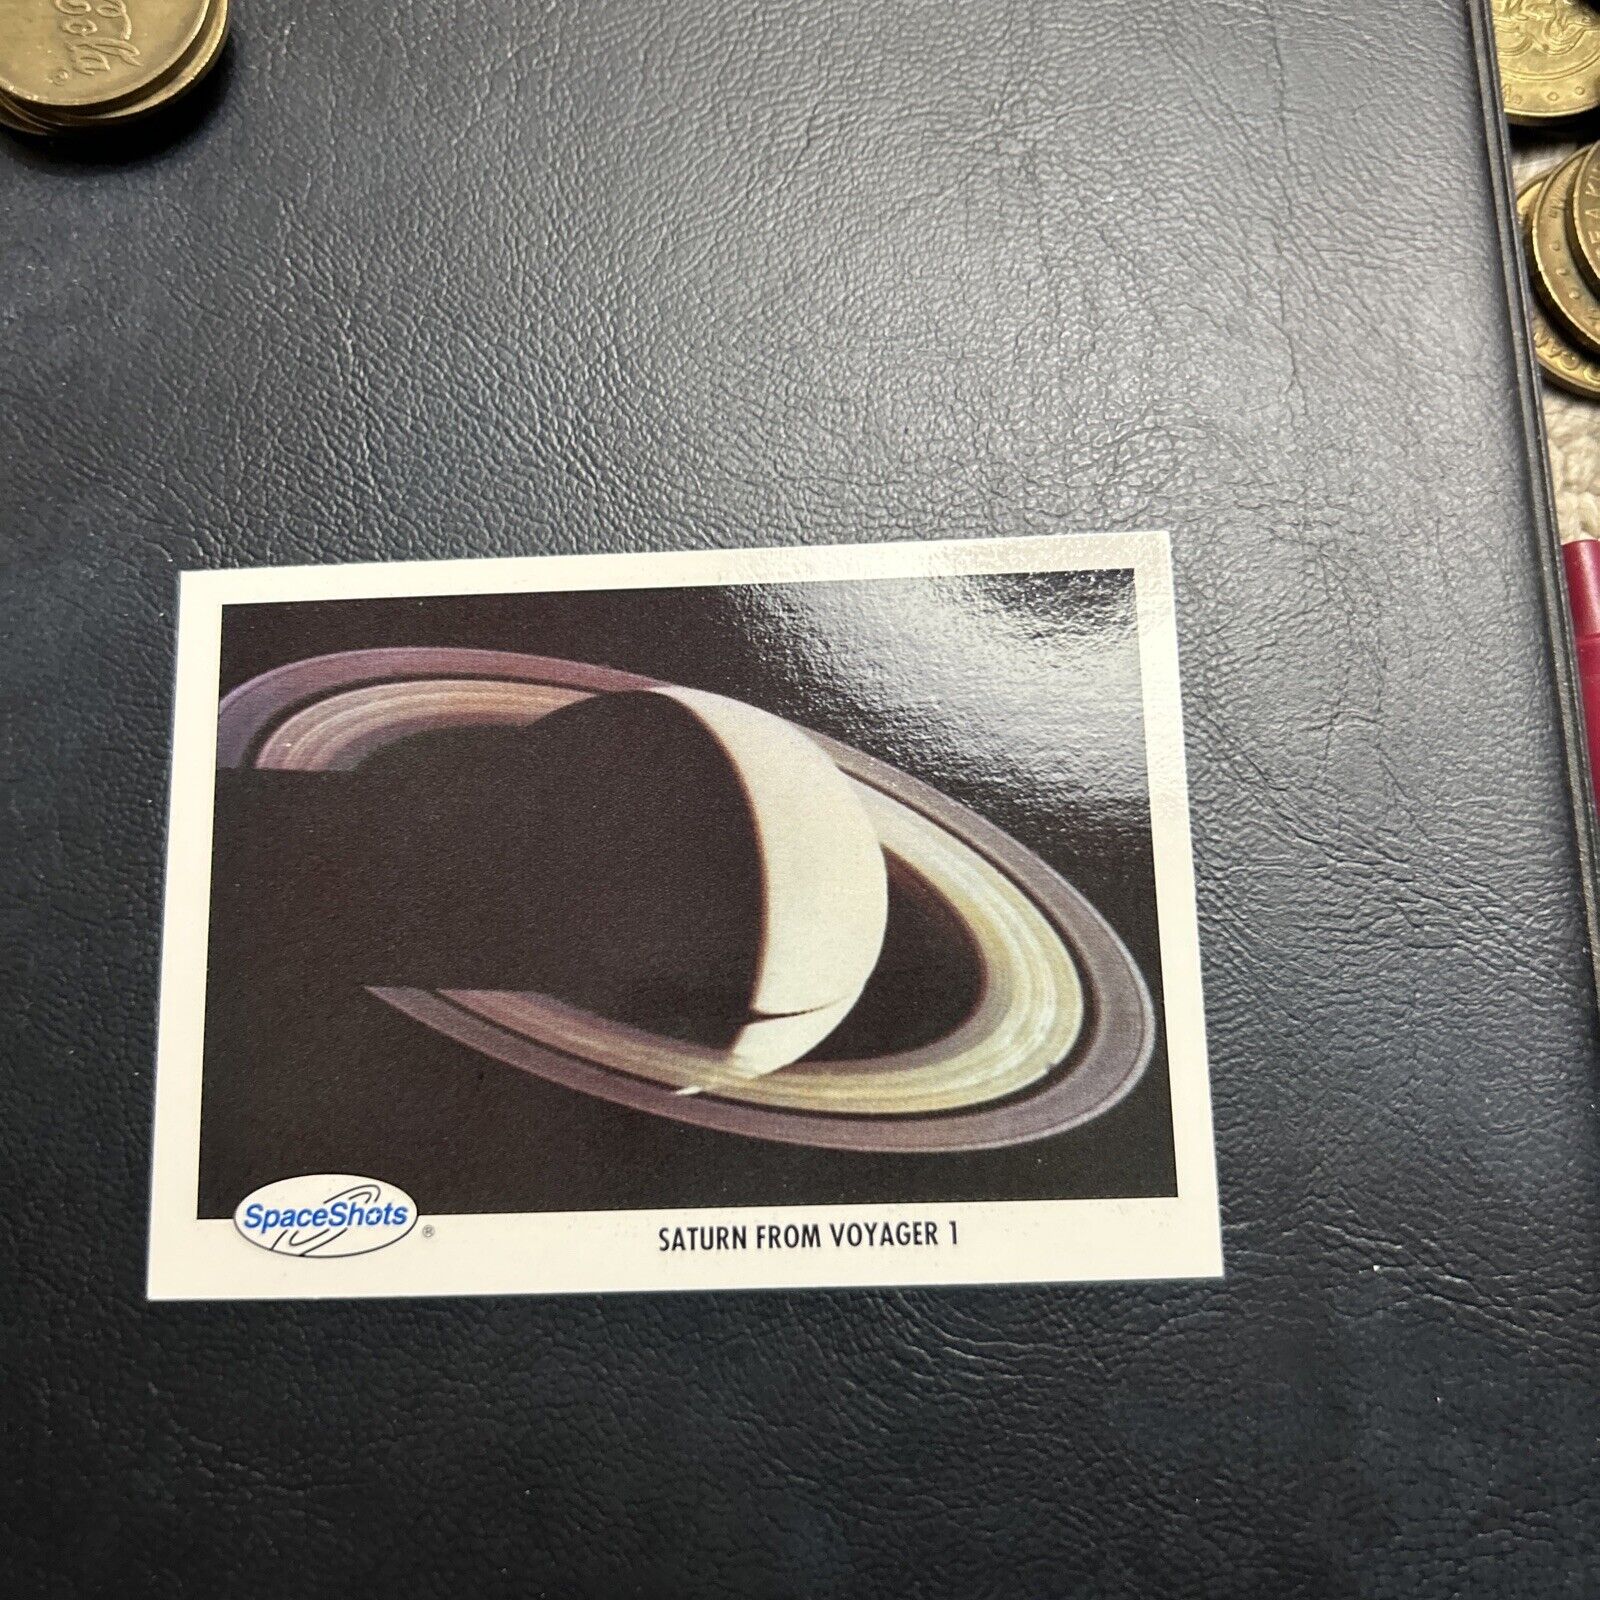 Jb12 Space Shots 1990 1992 Series 3 #0316 Saturn From Voyager 1